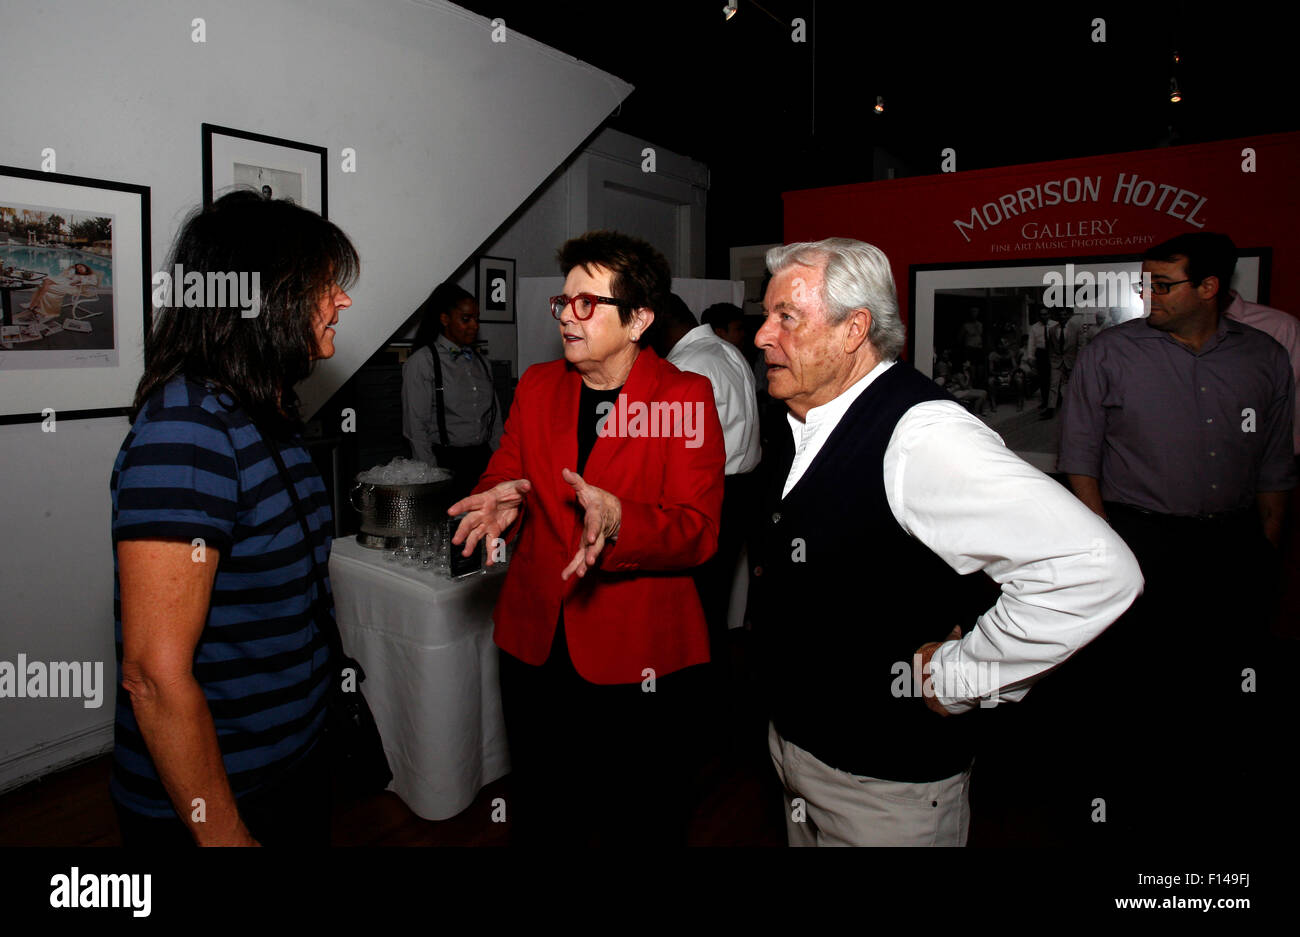 New York, USA. 26th August, 2015. Tennis legend Billie Jean King speaks with the british photographic legend Terry O'Neil during a reception at New York's Morrison Hotel Gallery in Soho on August 27th, 2015.   The event sponsored by Citibank was to promote a show and book by O'Neil who photographed King and other celebrities extensively in the 1970's and 80's. Credit:  Adam Stoltman/Alamy Live News Stock Photo